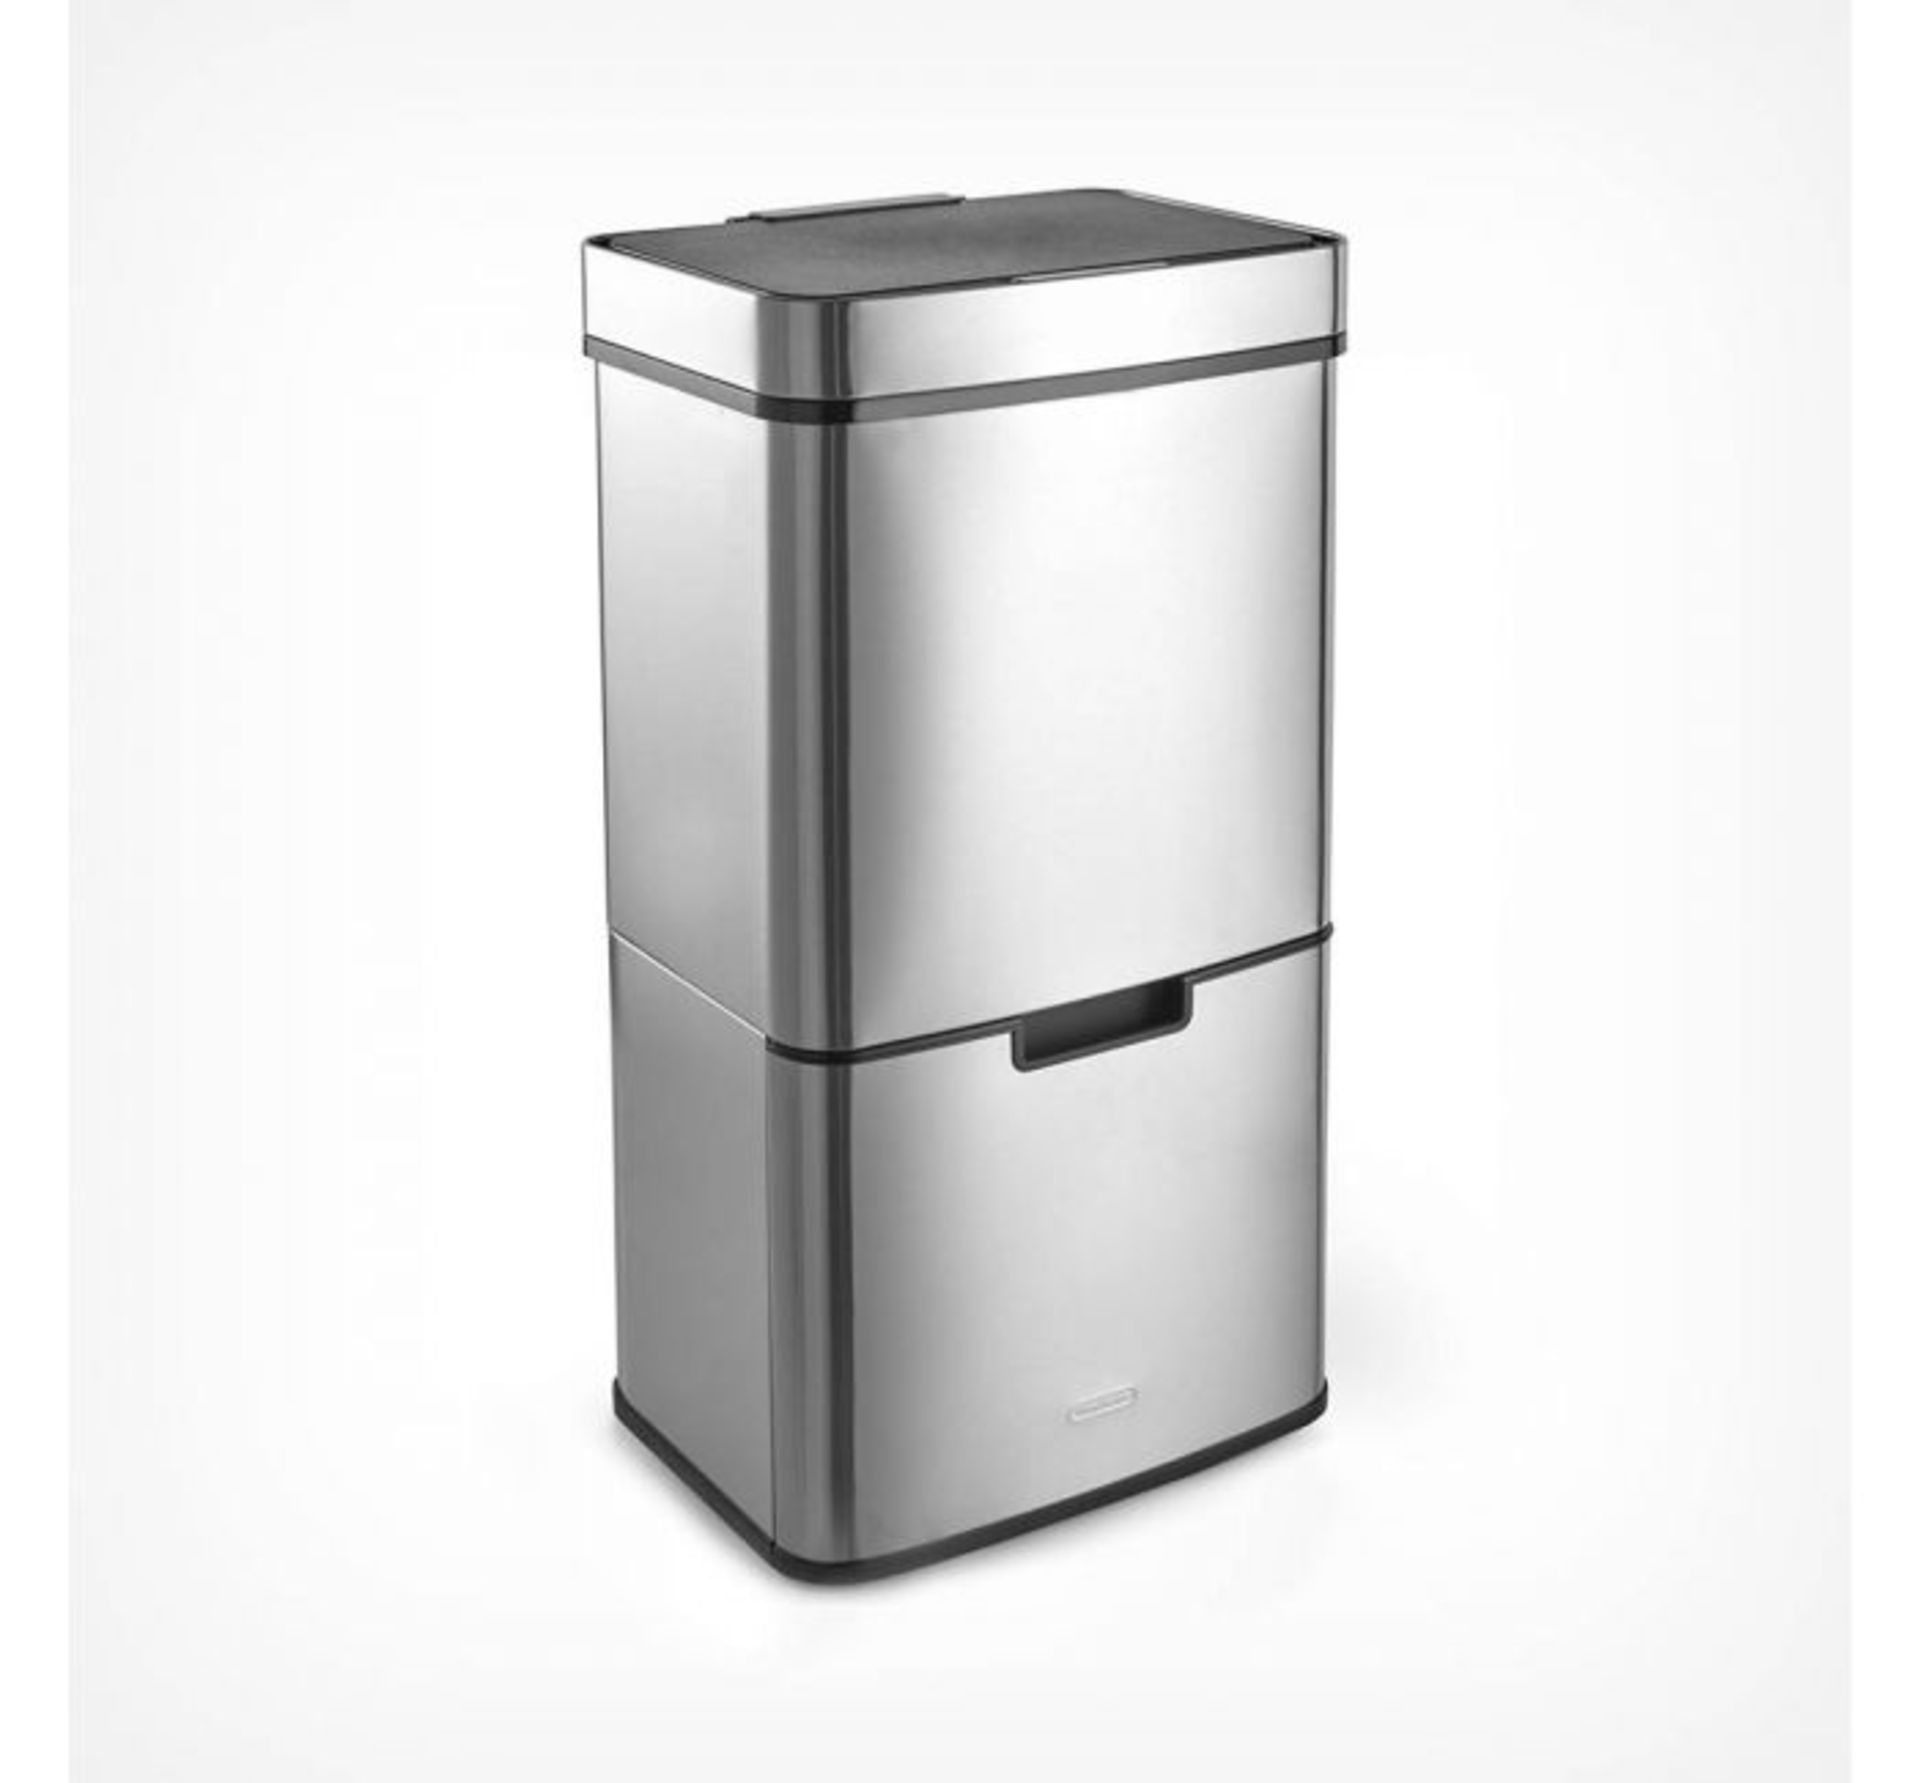 (HZ105) 72L Sensor Bin Infra-red technology detects an approach to open and close the bin lid ... - Image 2 of 3